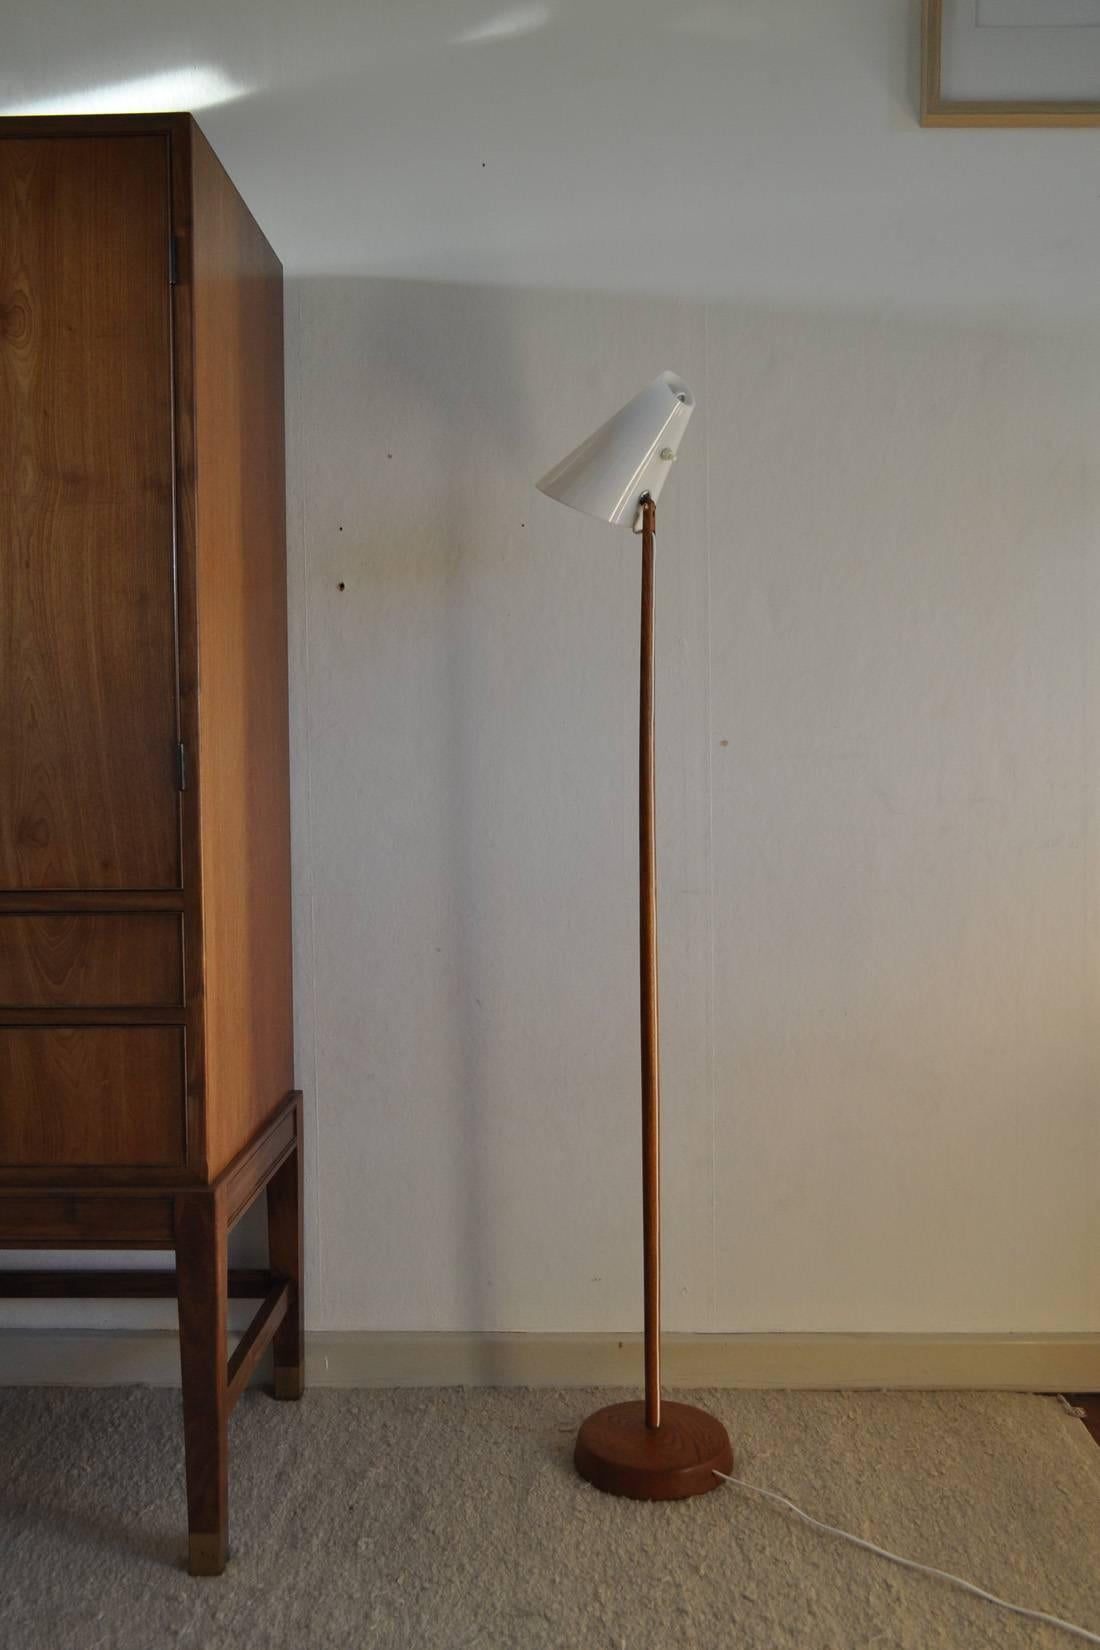 Floor lamp made of oak and acrylic shade by Uno & Östen Kristiansson
for Luxus in the 1950s-1960s, Sweden.
Dimensions: Height 130 cm
Lamp shade diameter 5/15 x 20 cm.

Excellent vintage condition.